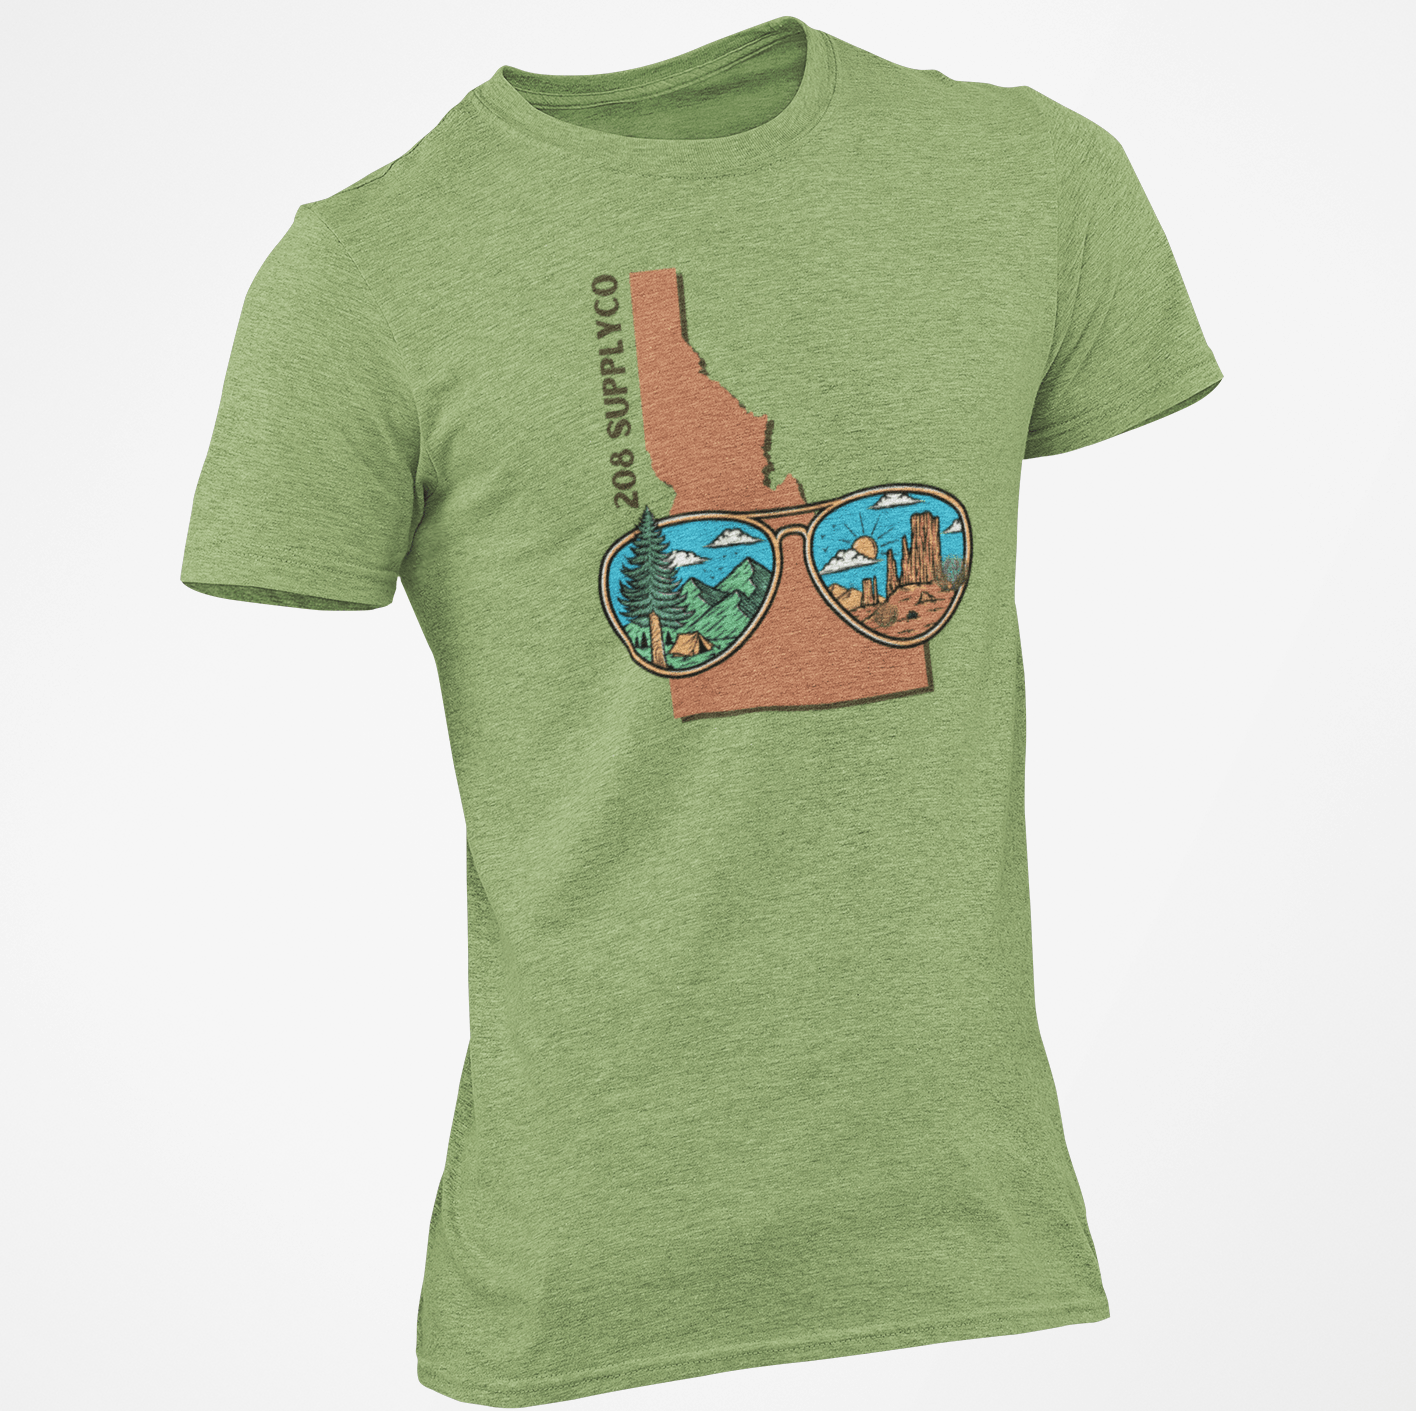 208 Supply Co T-shirt Small / Heather Green Sunglasses Required Unisex Tee